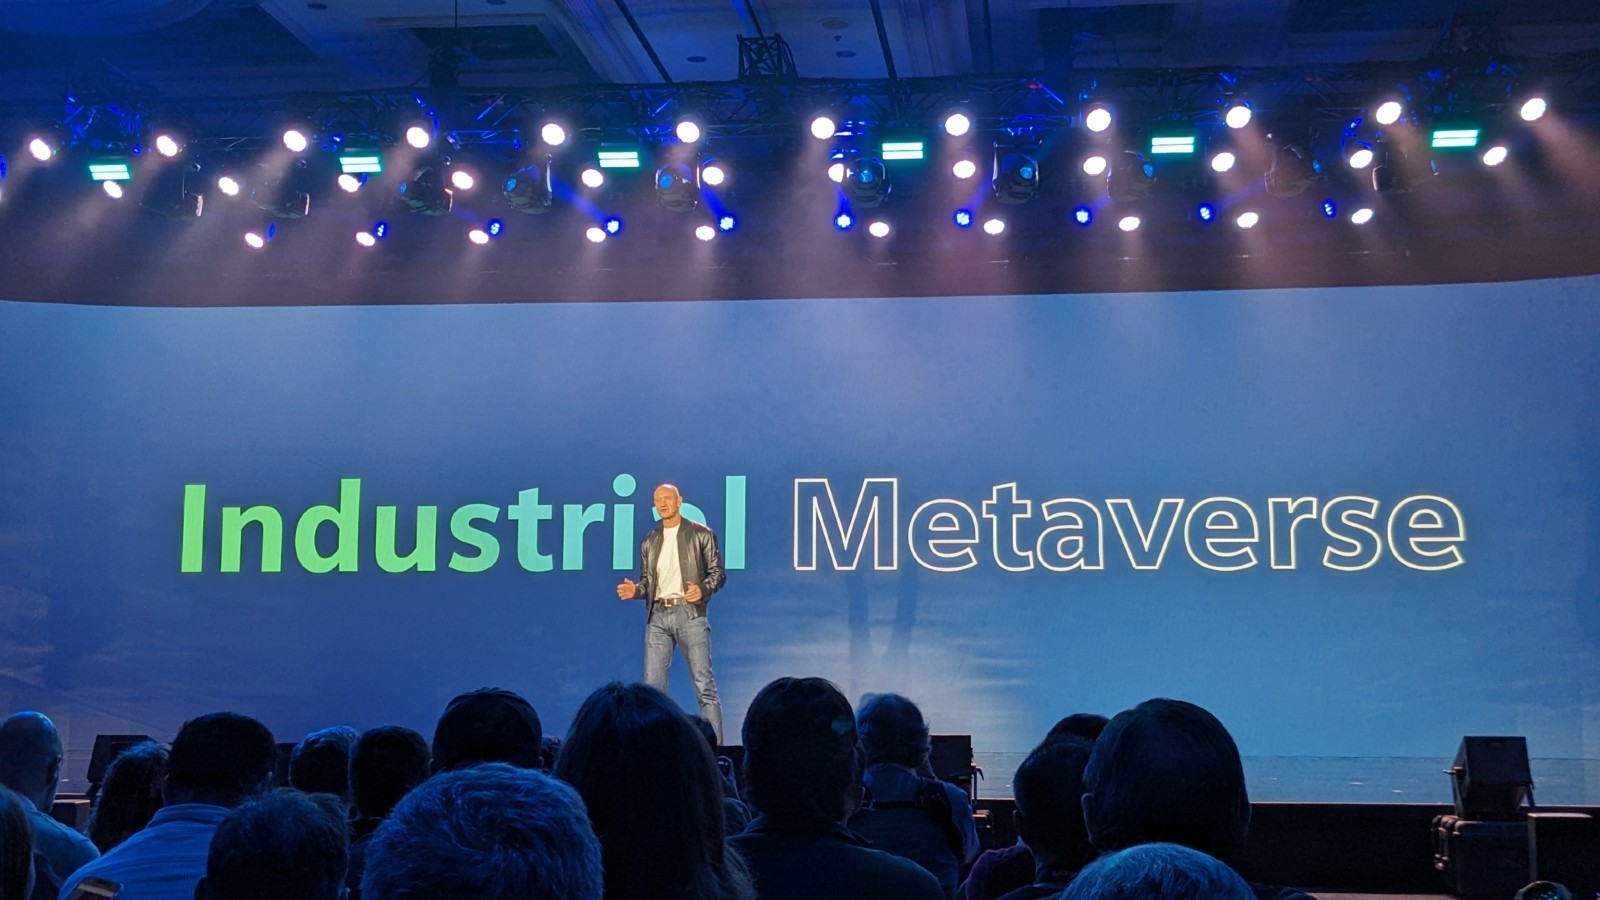 A man on stage at an event with the words industrial metaverse.